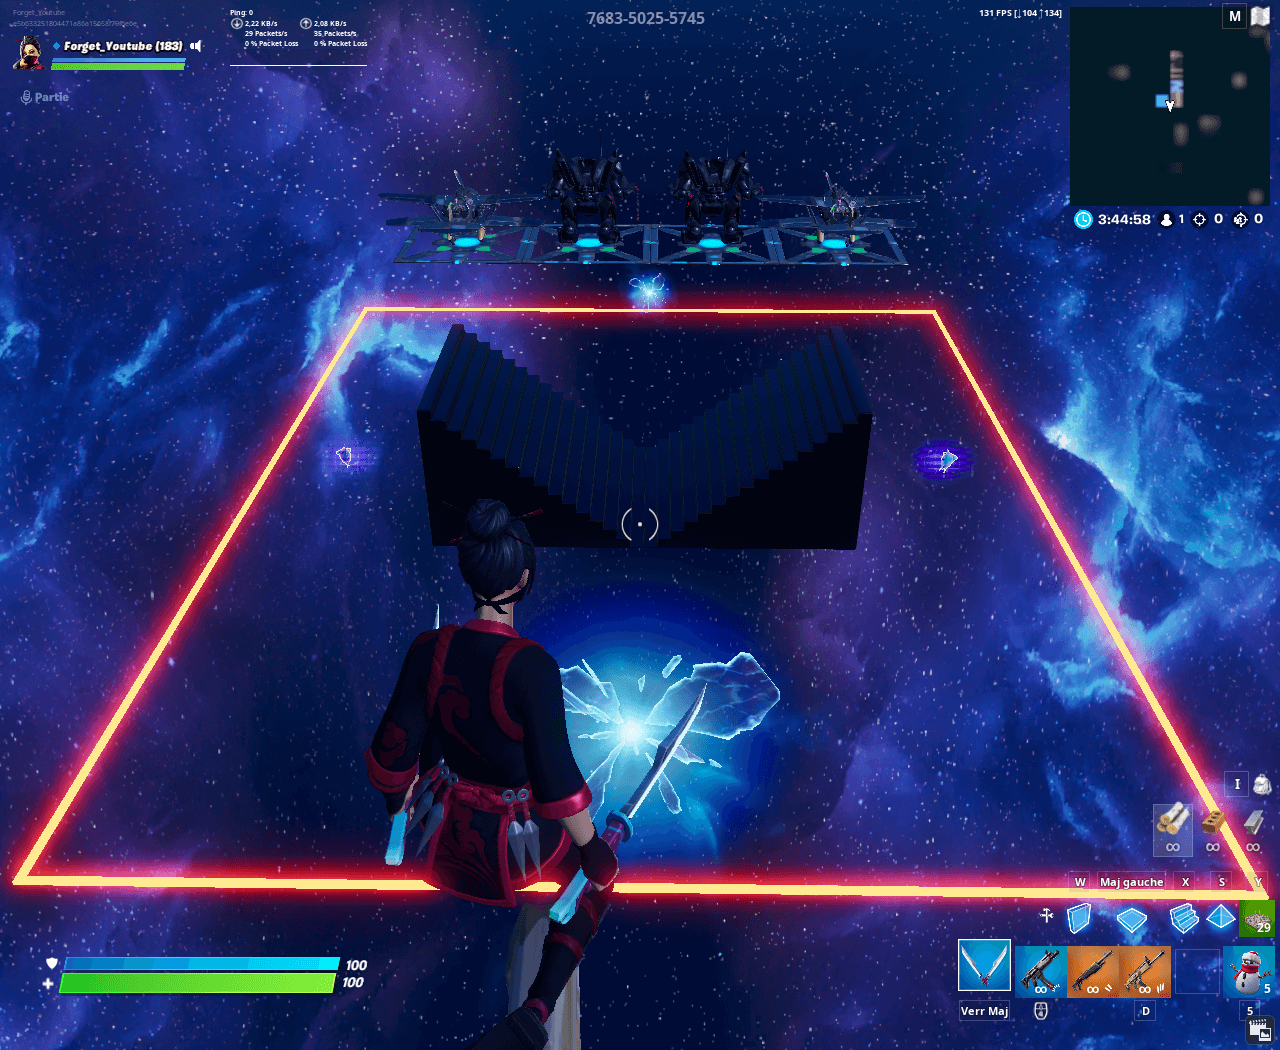 Build Fight Map 1v1 Stretched Resolution Fortnite Creative Map